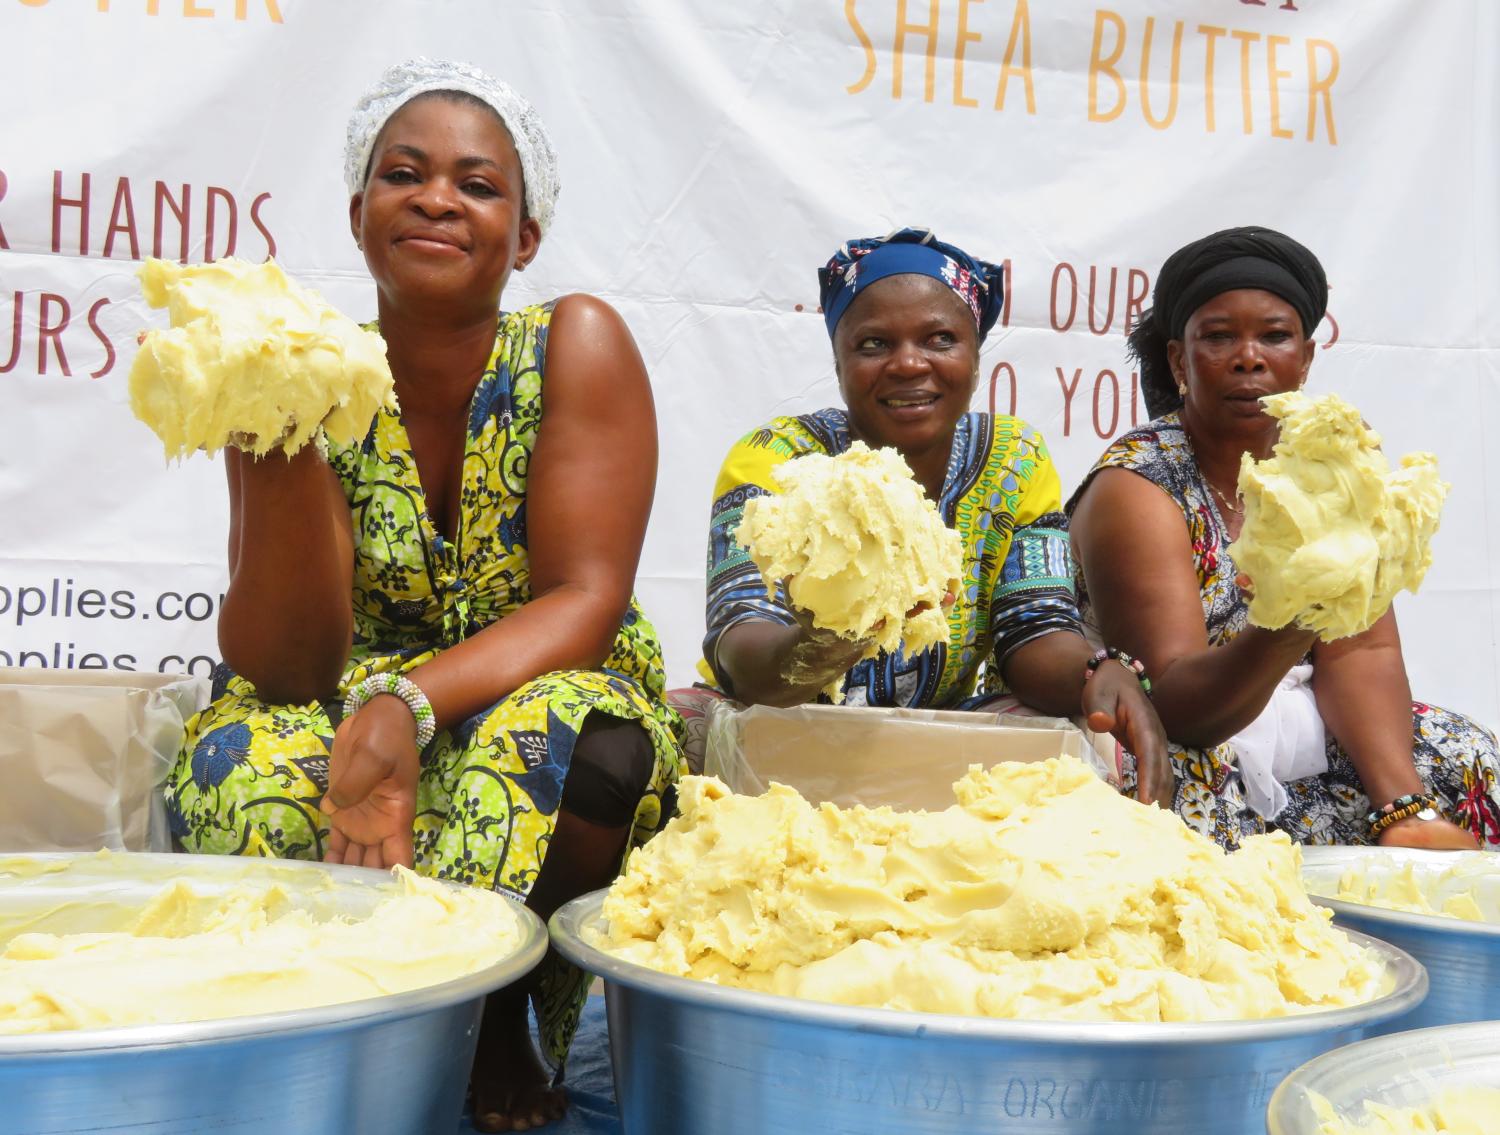 Just because your company may be a small social enterprise does not mean it cannot generate outsized impact. Just take a look at this shea butter company in Ghana.